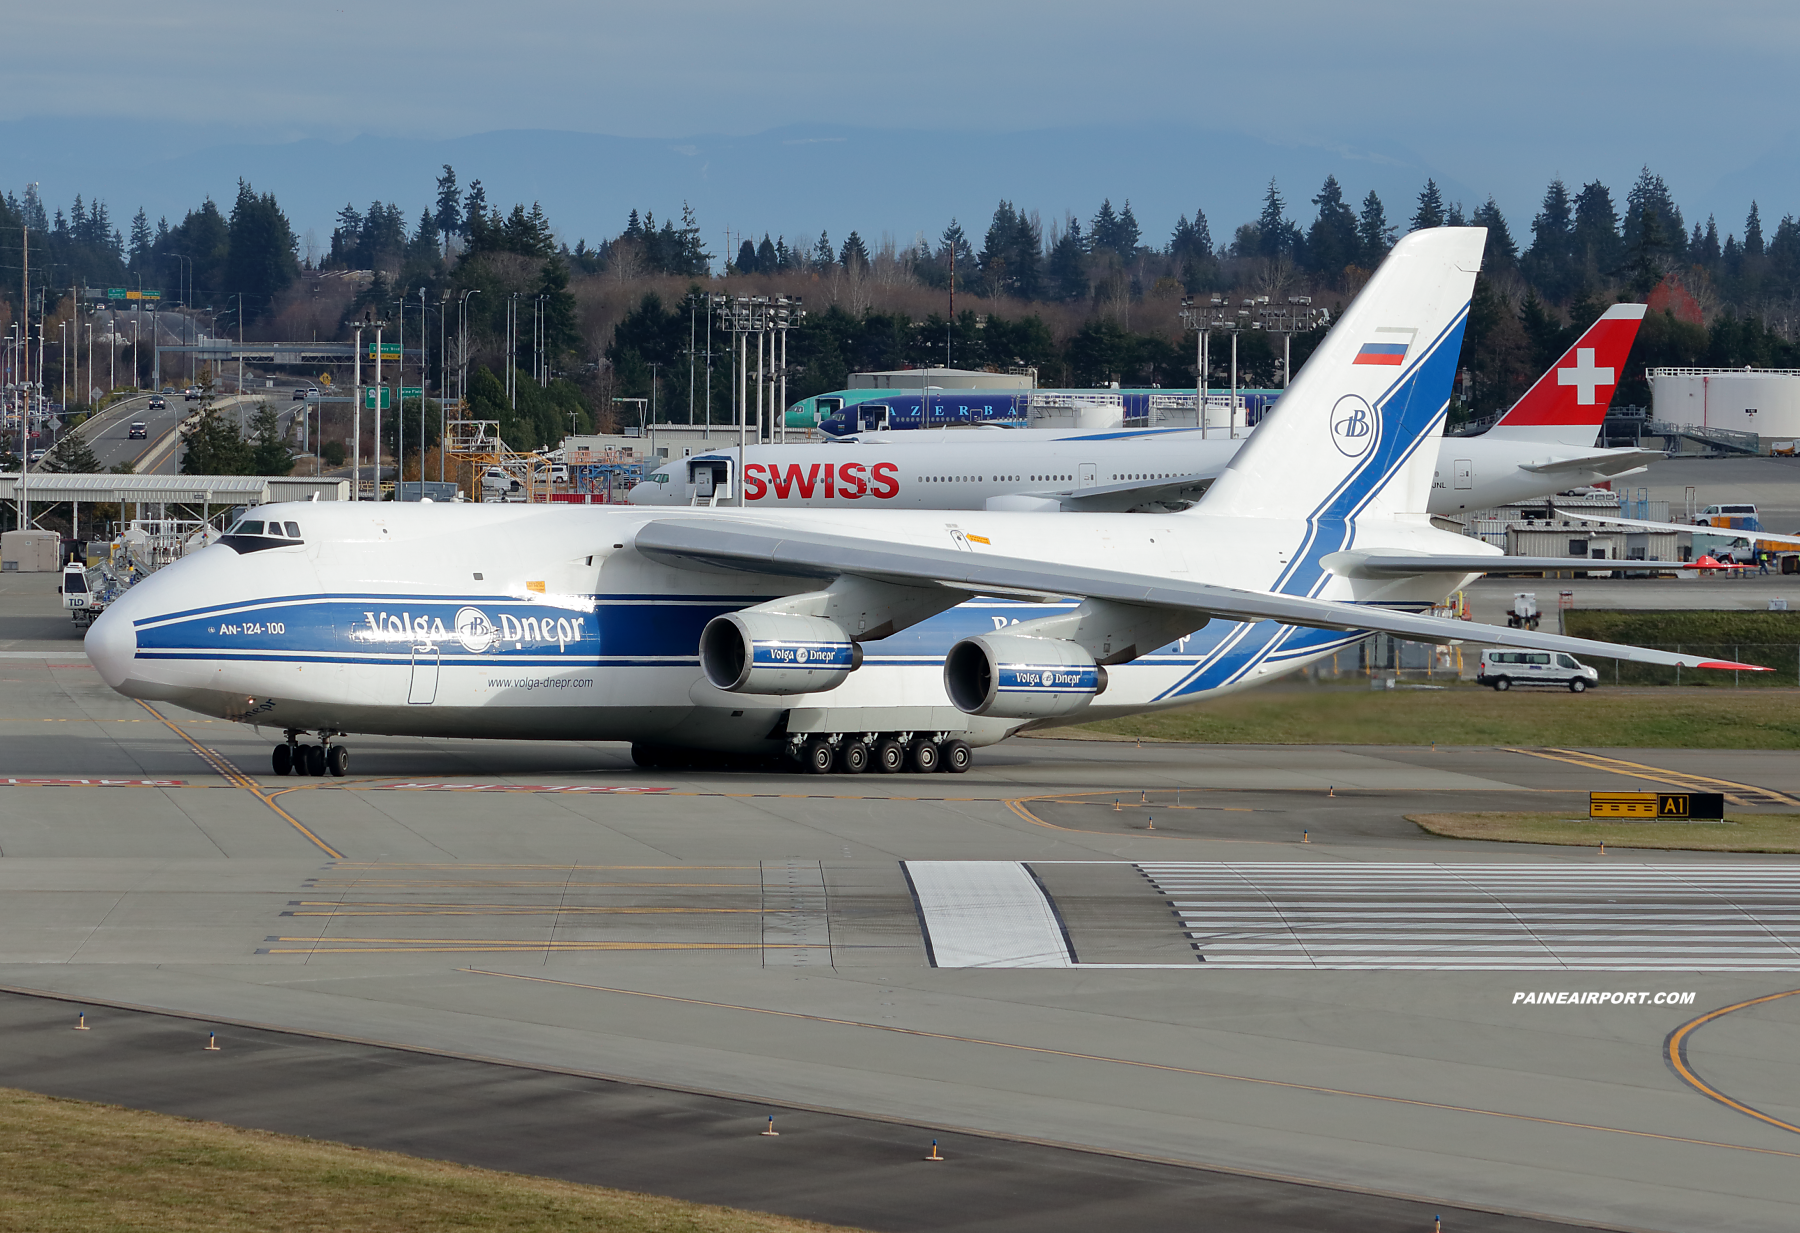 An-124 RA-82046 at Paine Field